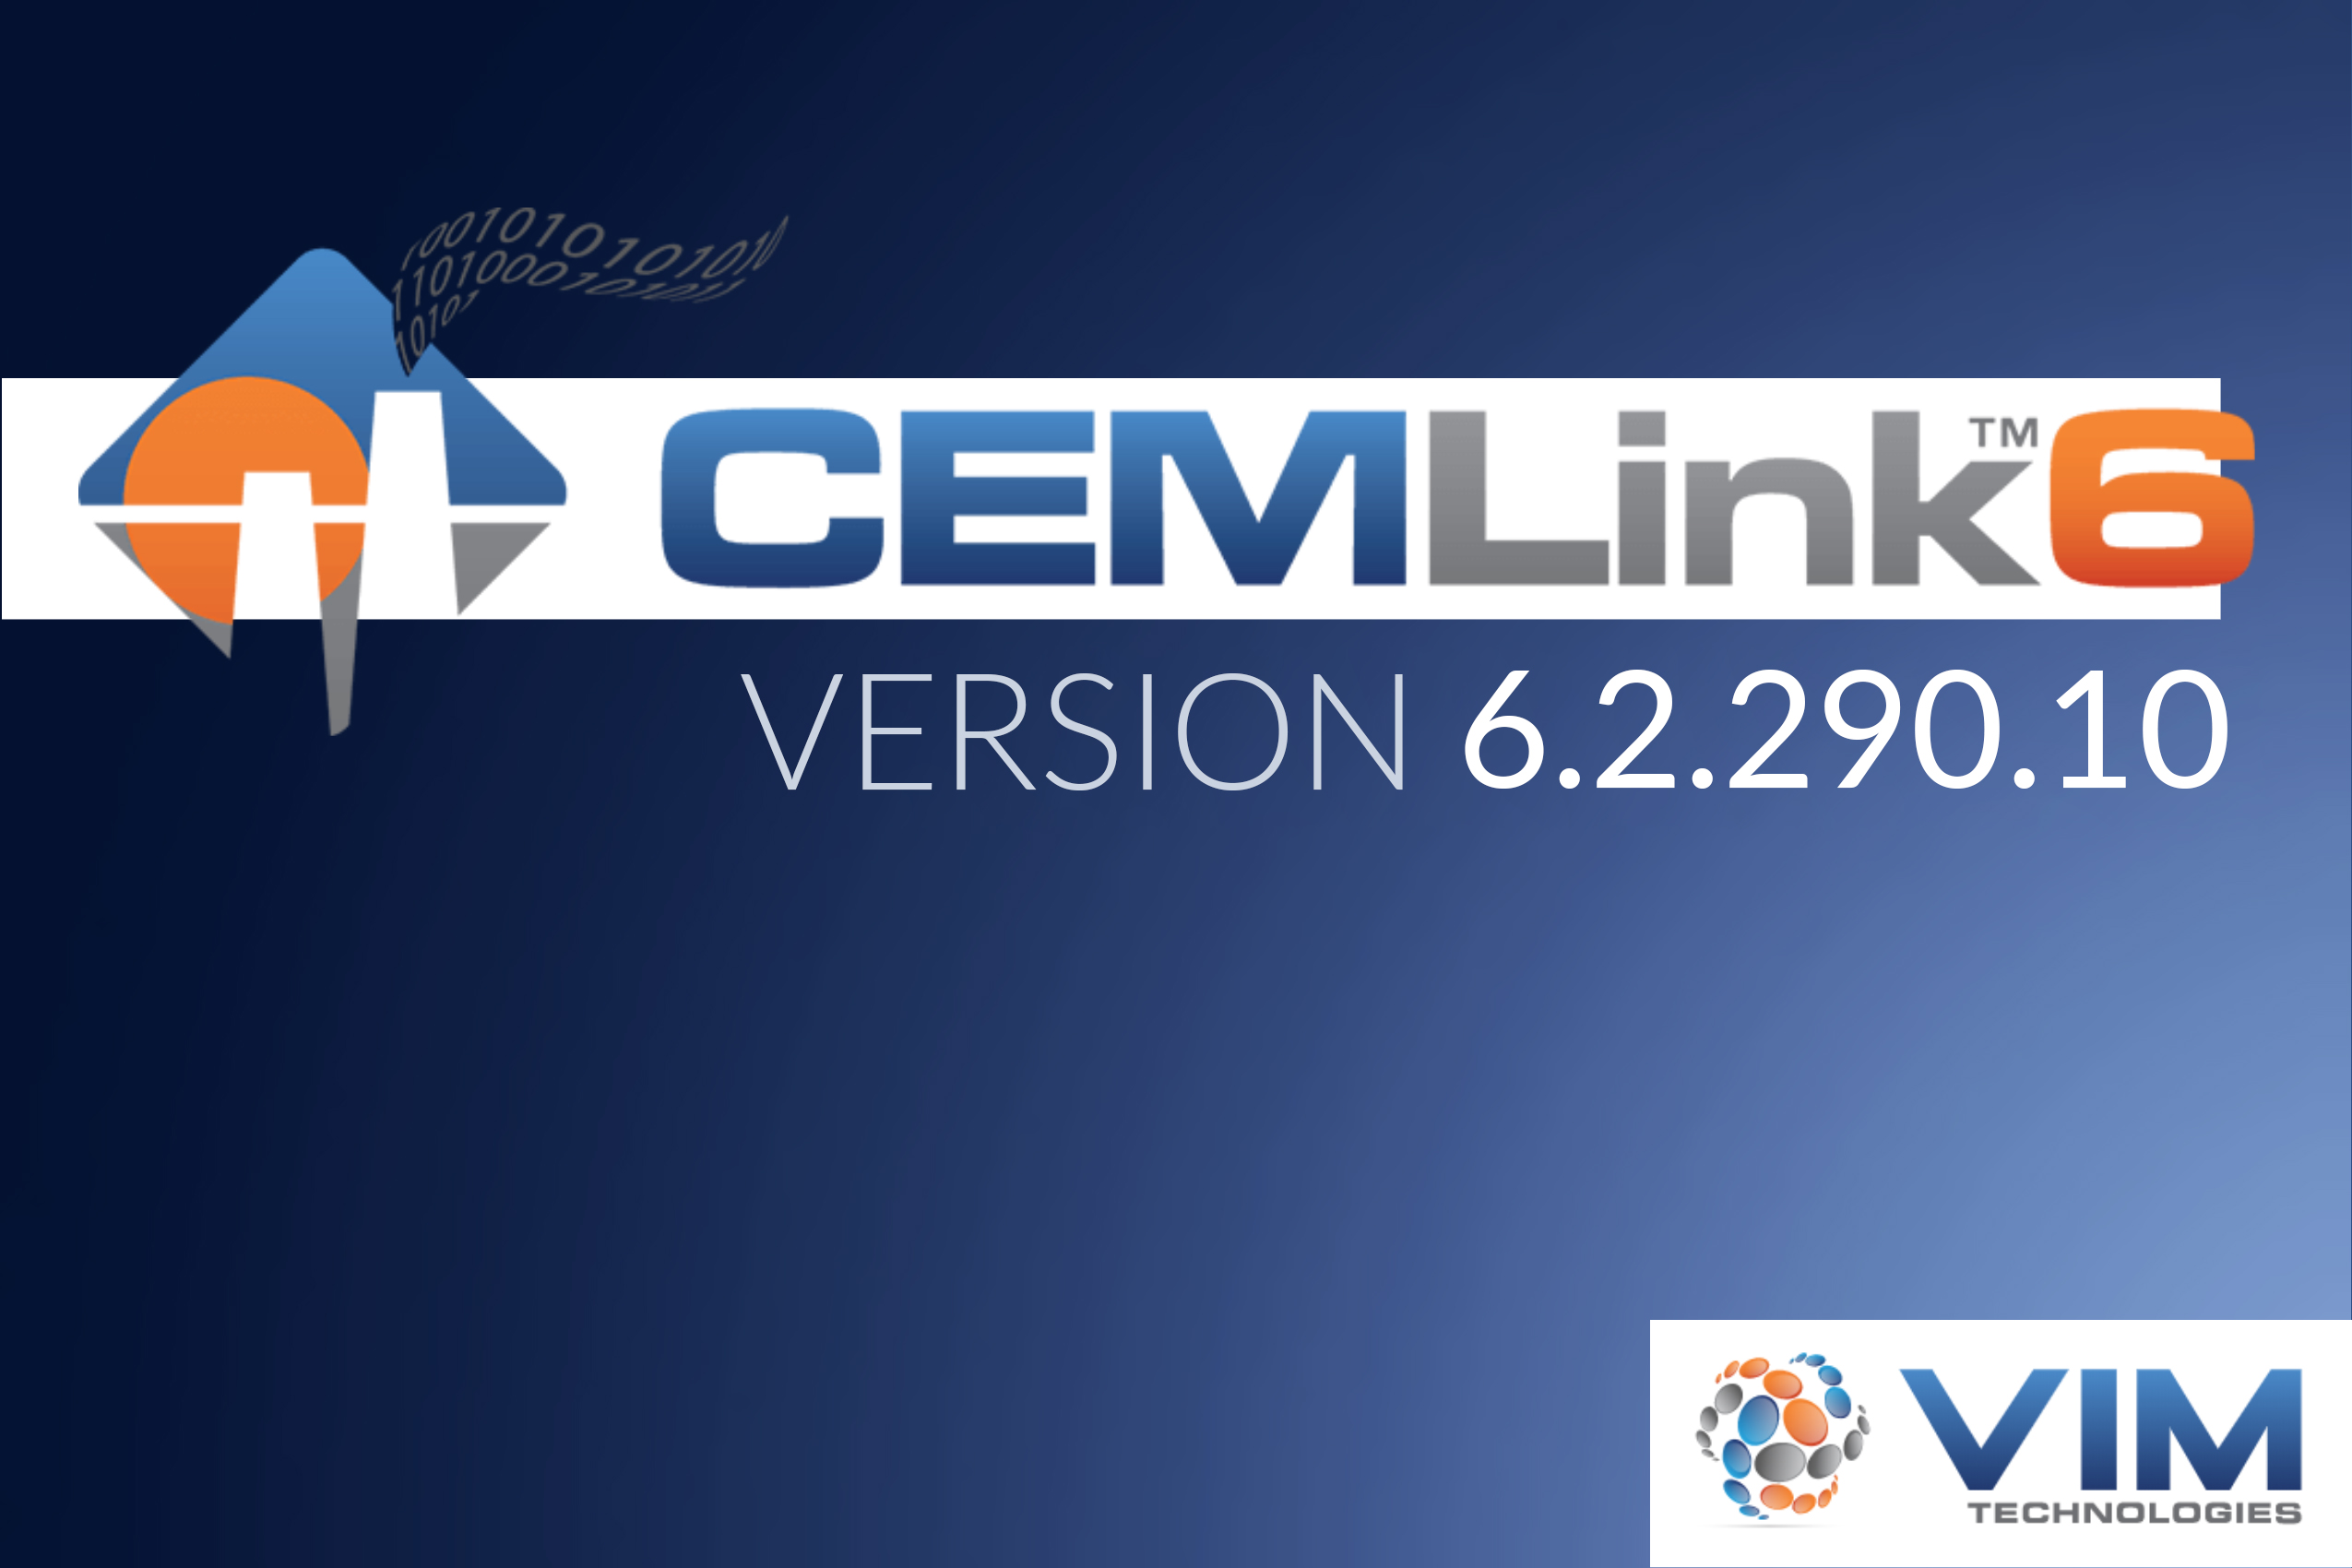 Version 6.2.290.10 of CEMLink6 Now Available